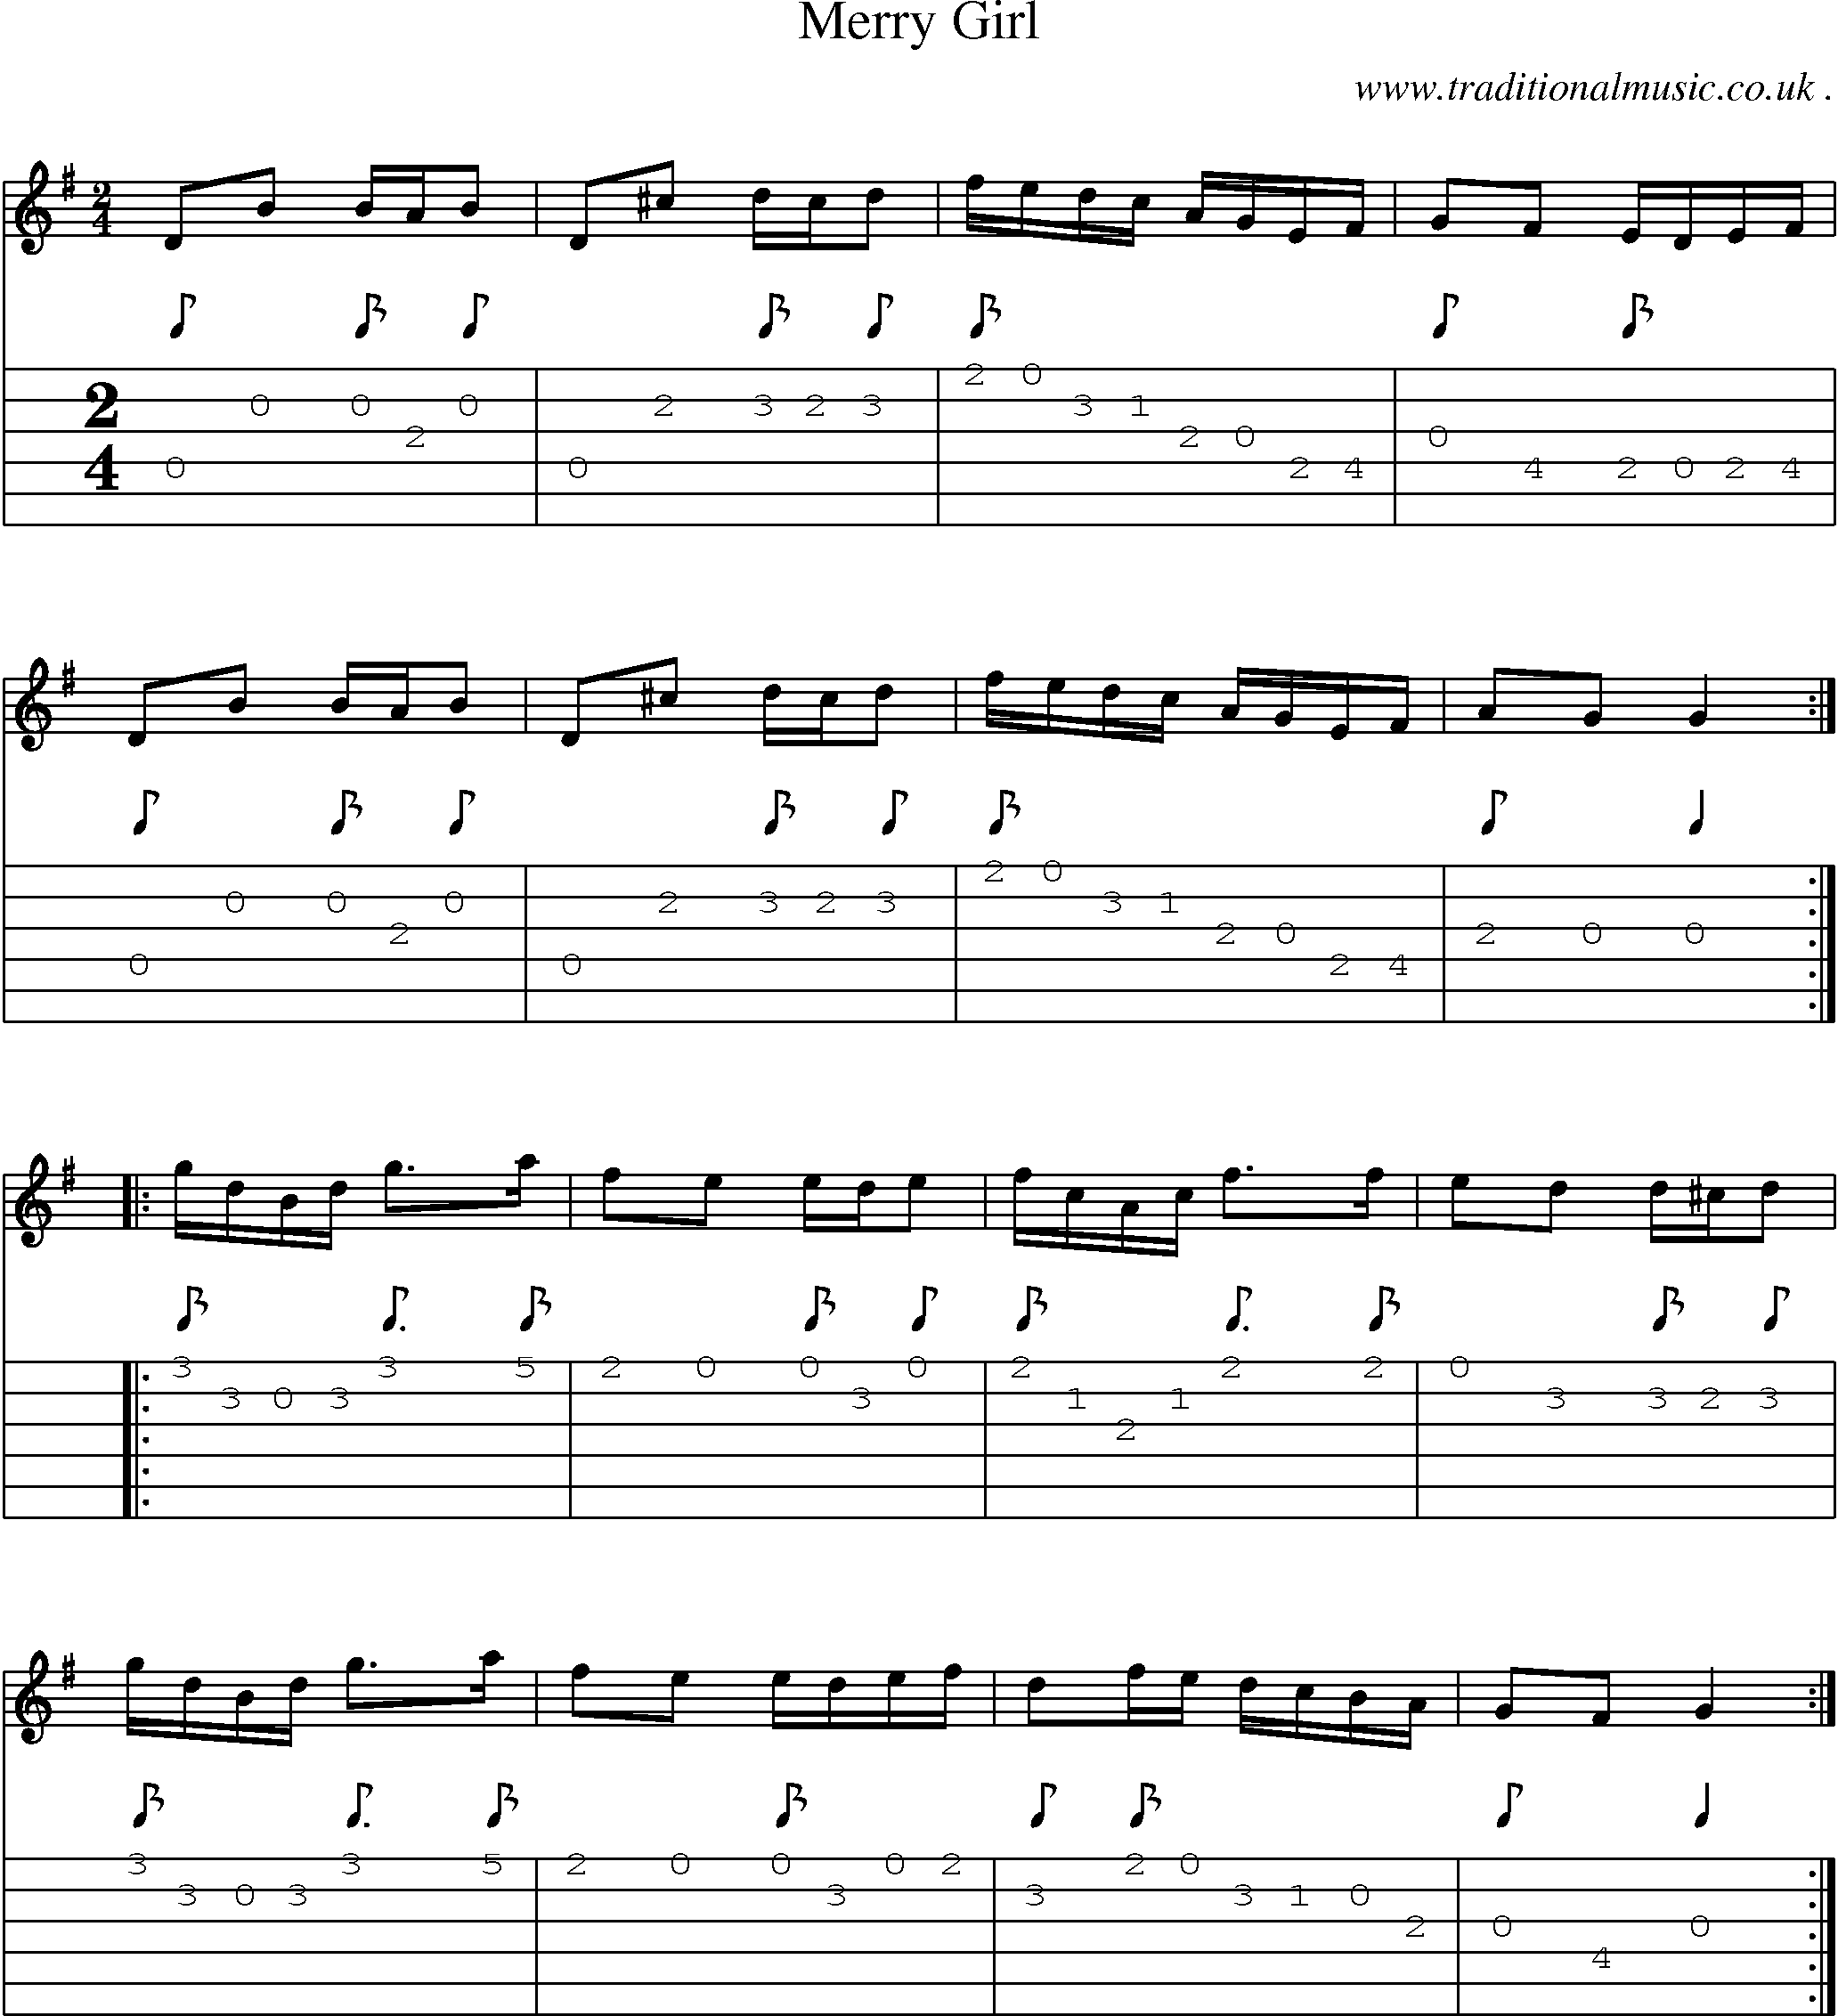 Sheet-Music and Guitar Tabs for Merry Girl